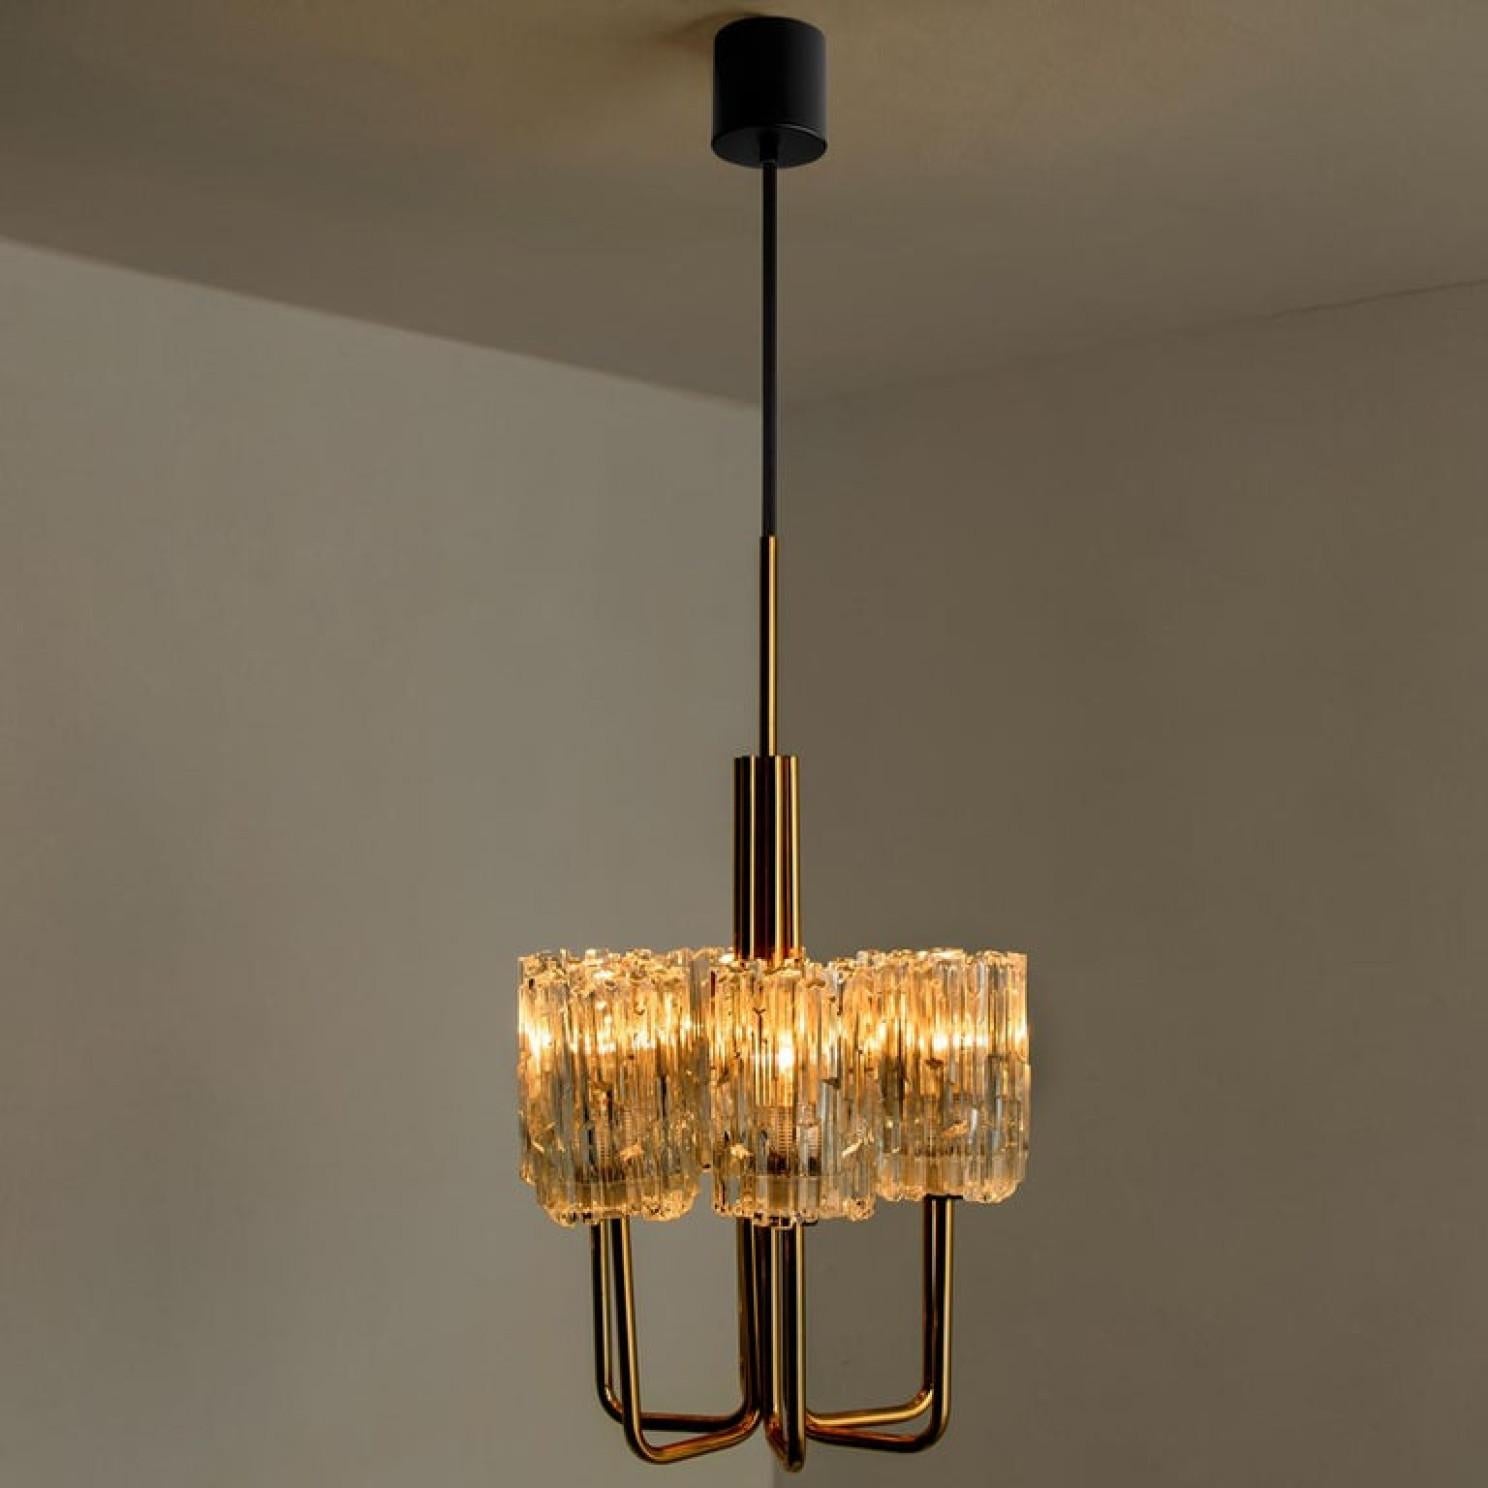 Midcentury Brass and Blown Glass Chandelier by Hillebrand, 1960s For Sale 3